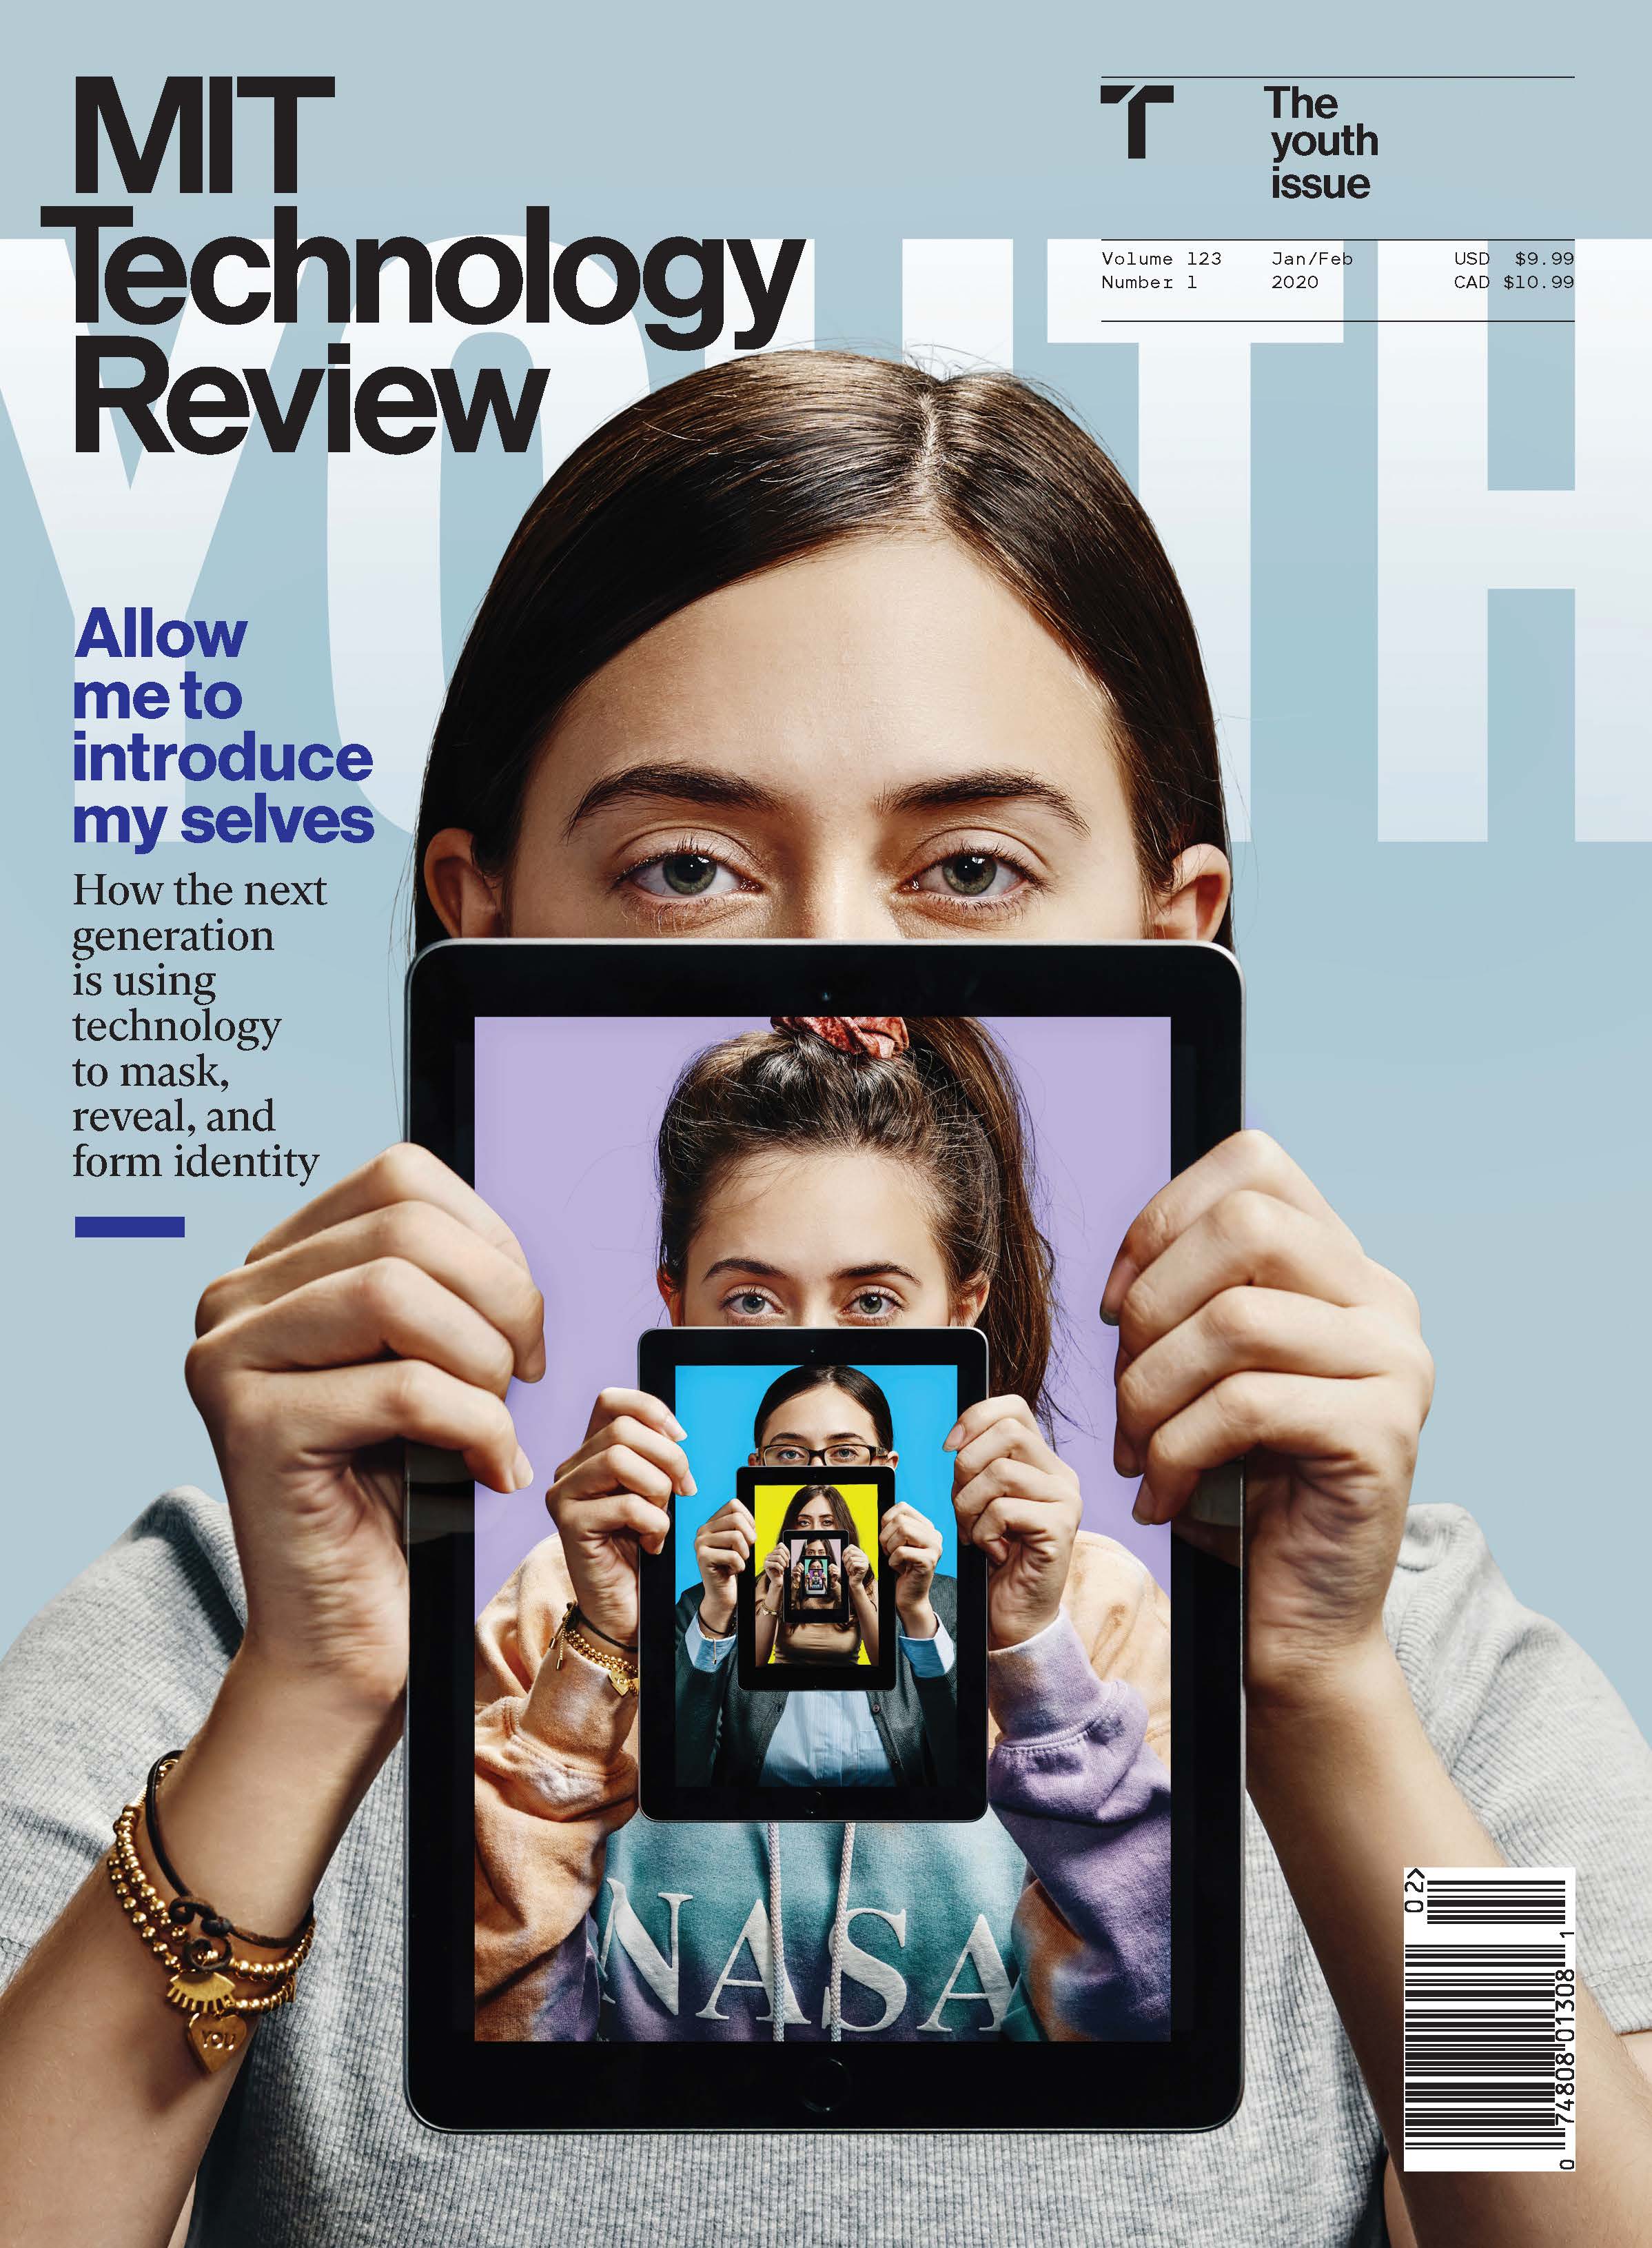 "MIT Technology Review" written in white letters on a light blue background and a photo of a woman holding an iPad.